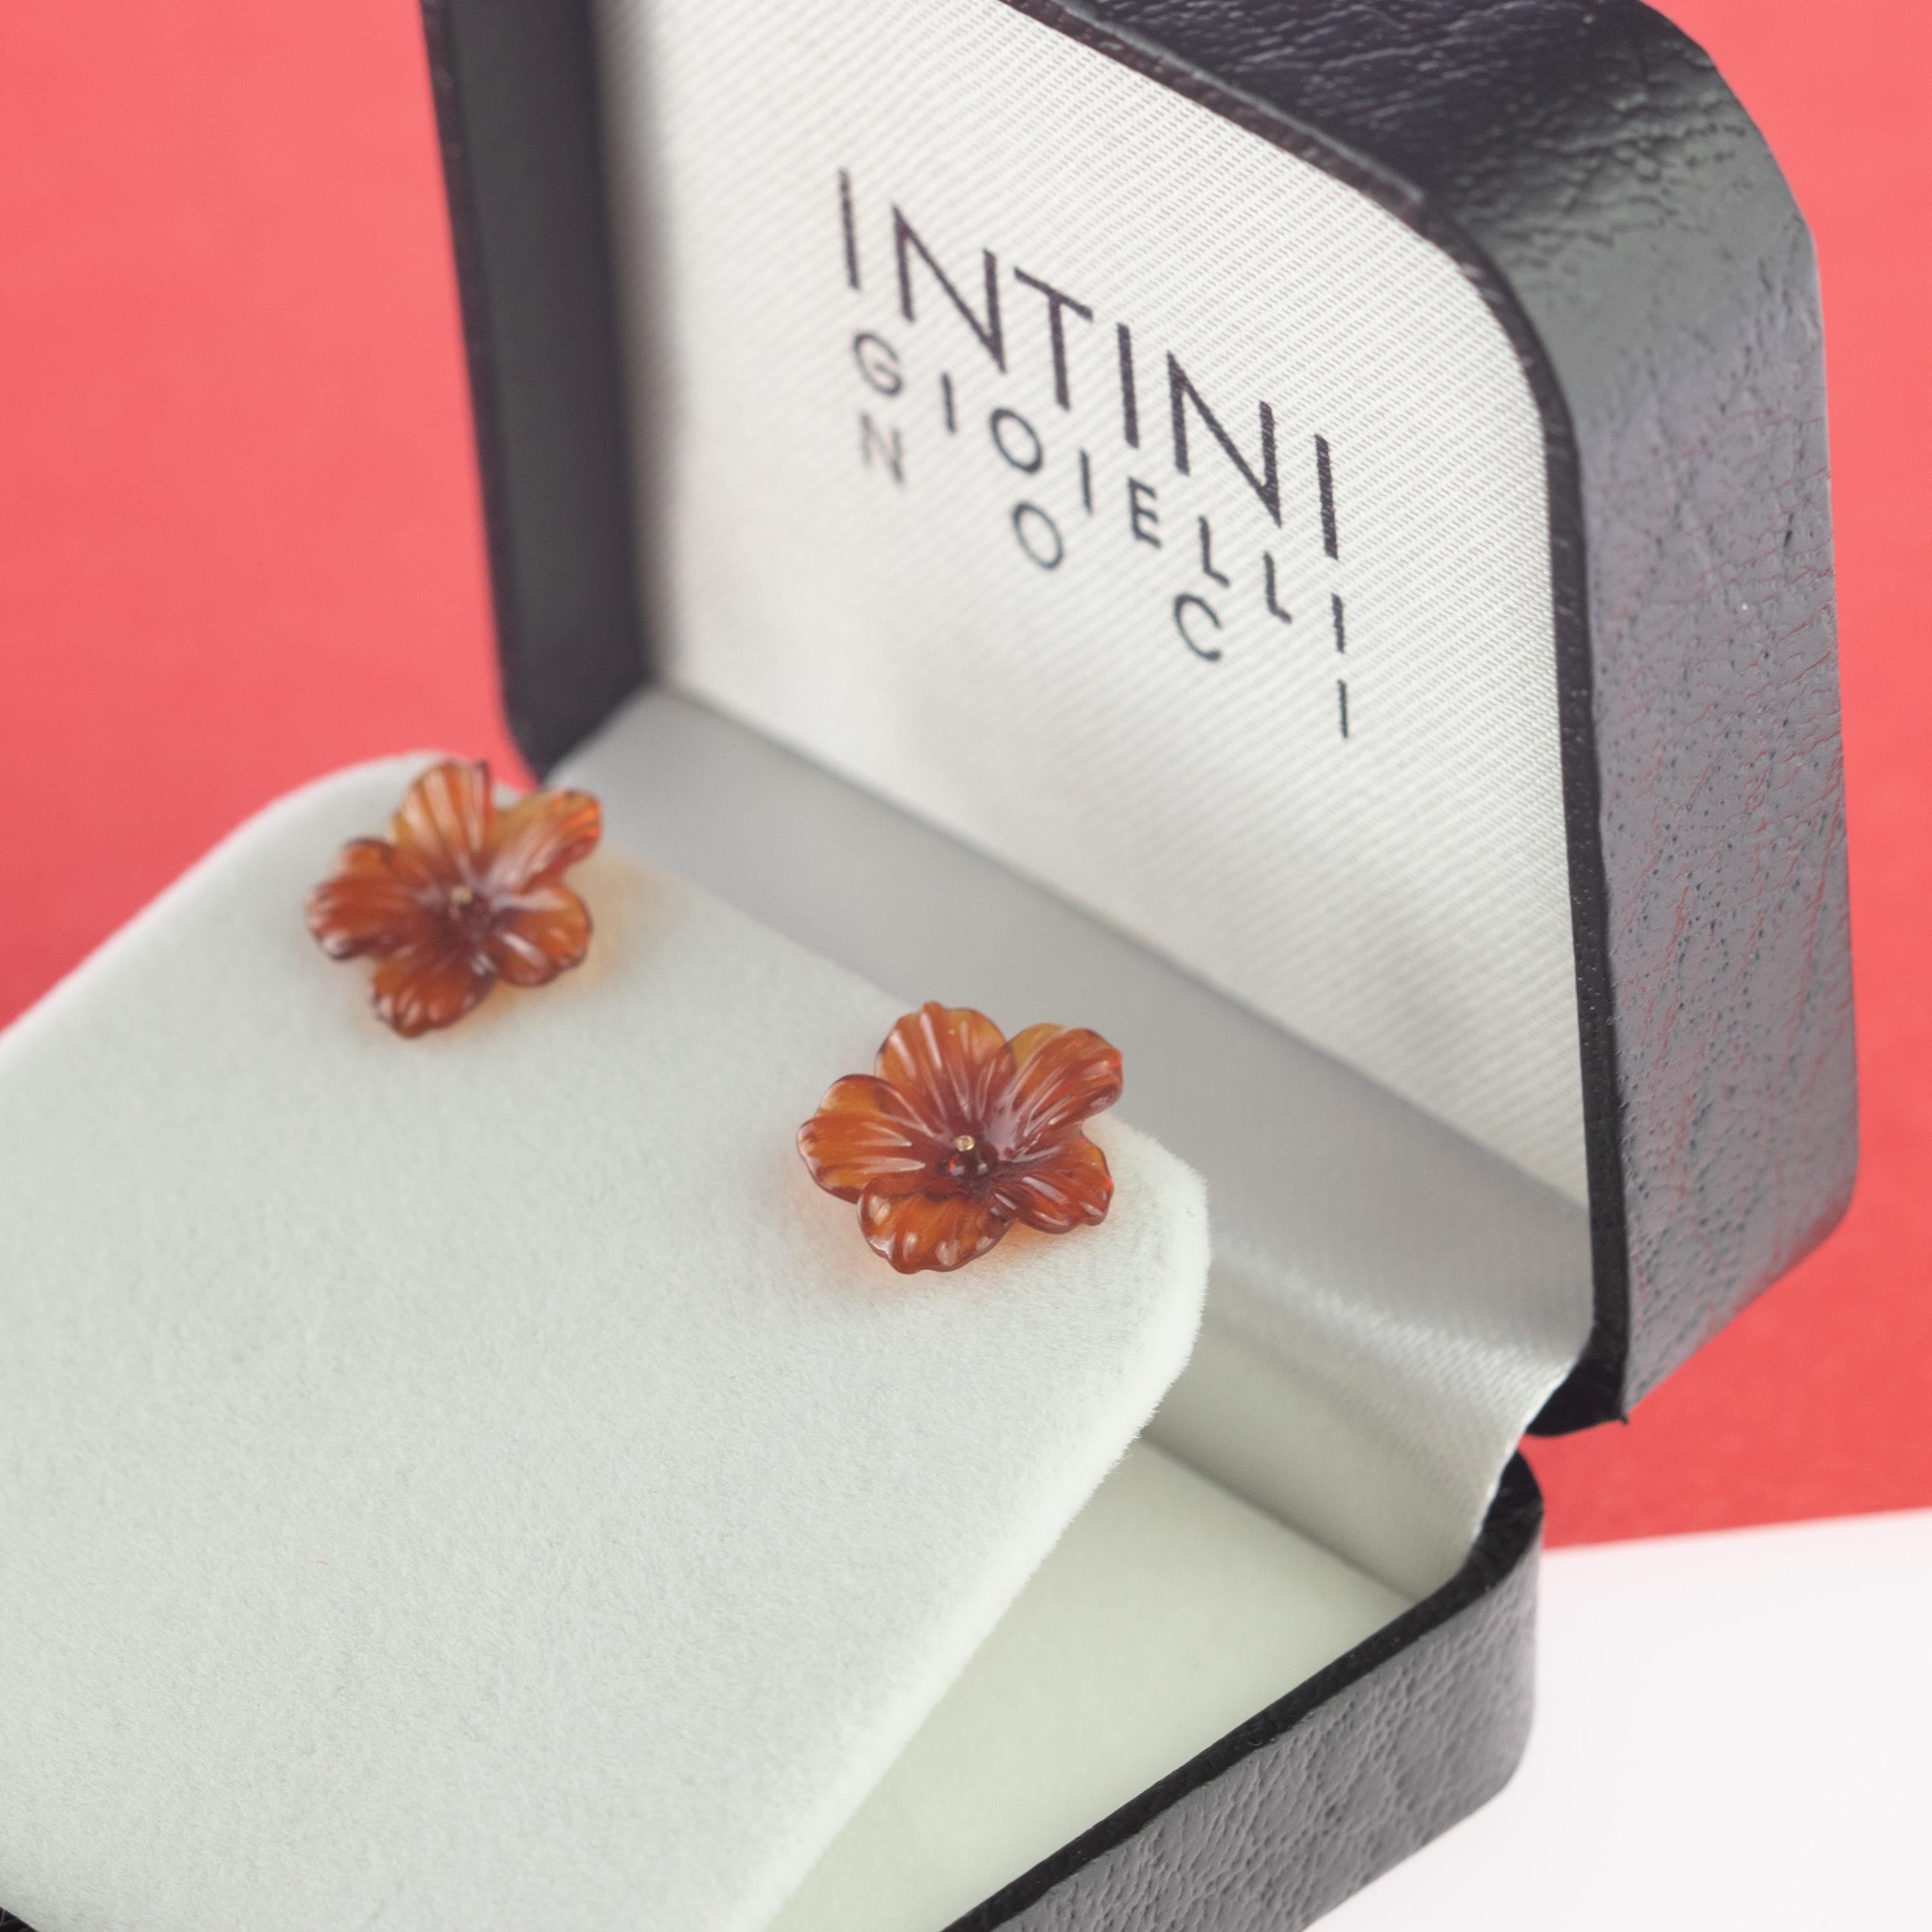 Stunning and sweet 4 carat brown agate flower stud earrings. Carved petals that evoke the italian handmade traditional jewelry work, wrapping itself in a soft look enriched with 18 karat yellow gold manifesting glamour and exquisite taste. 
